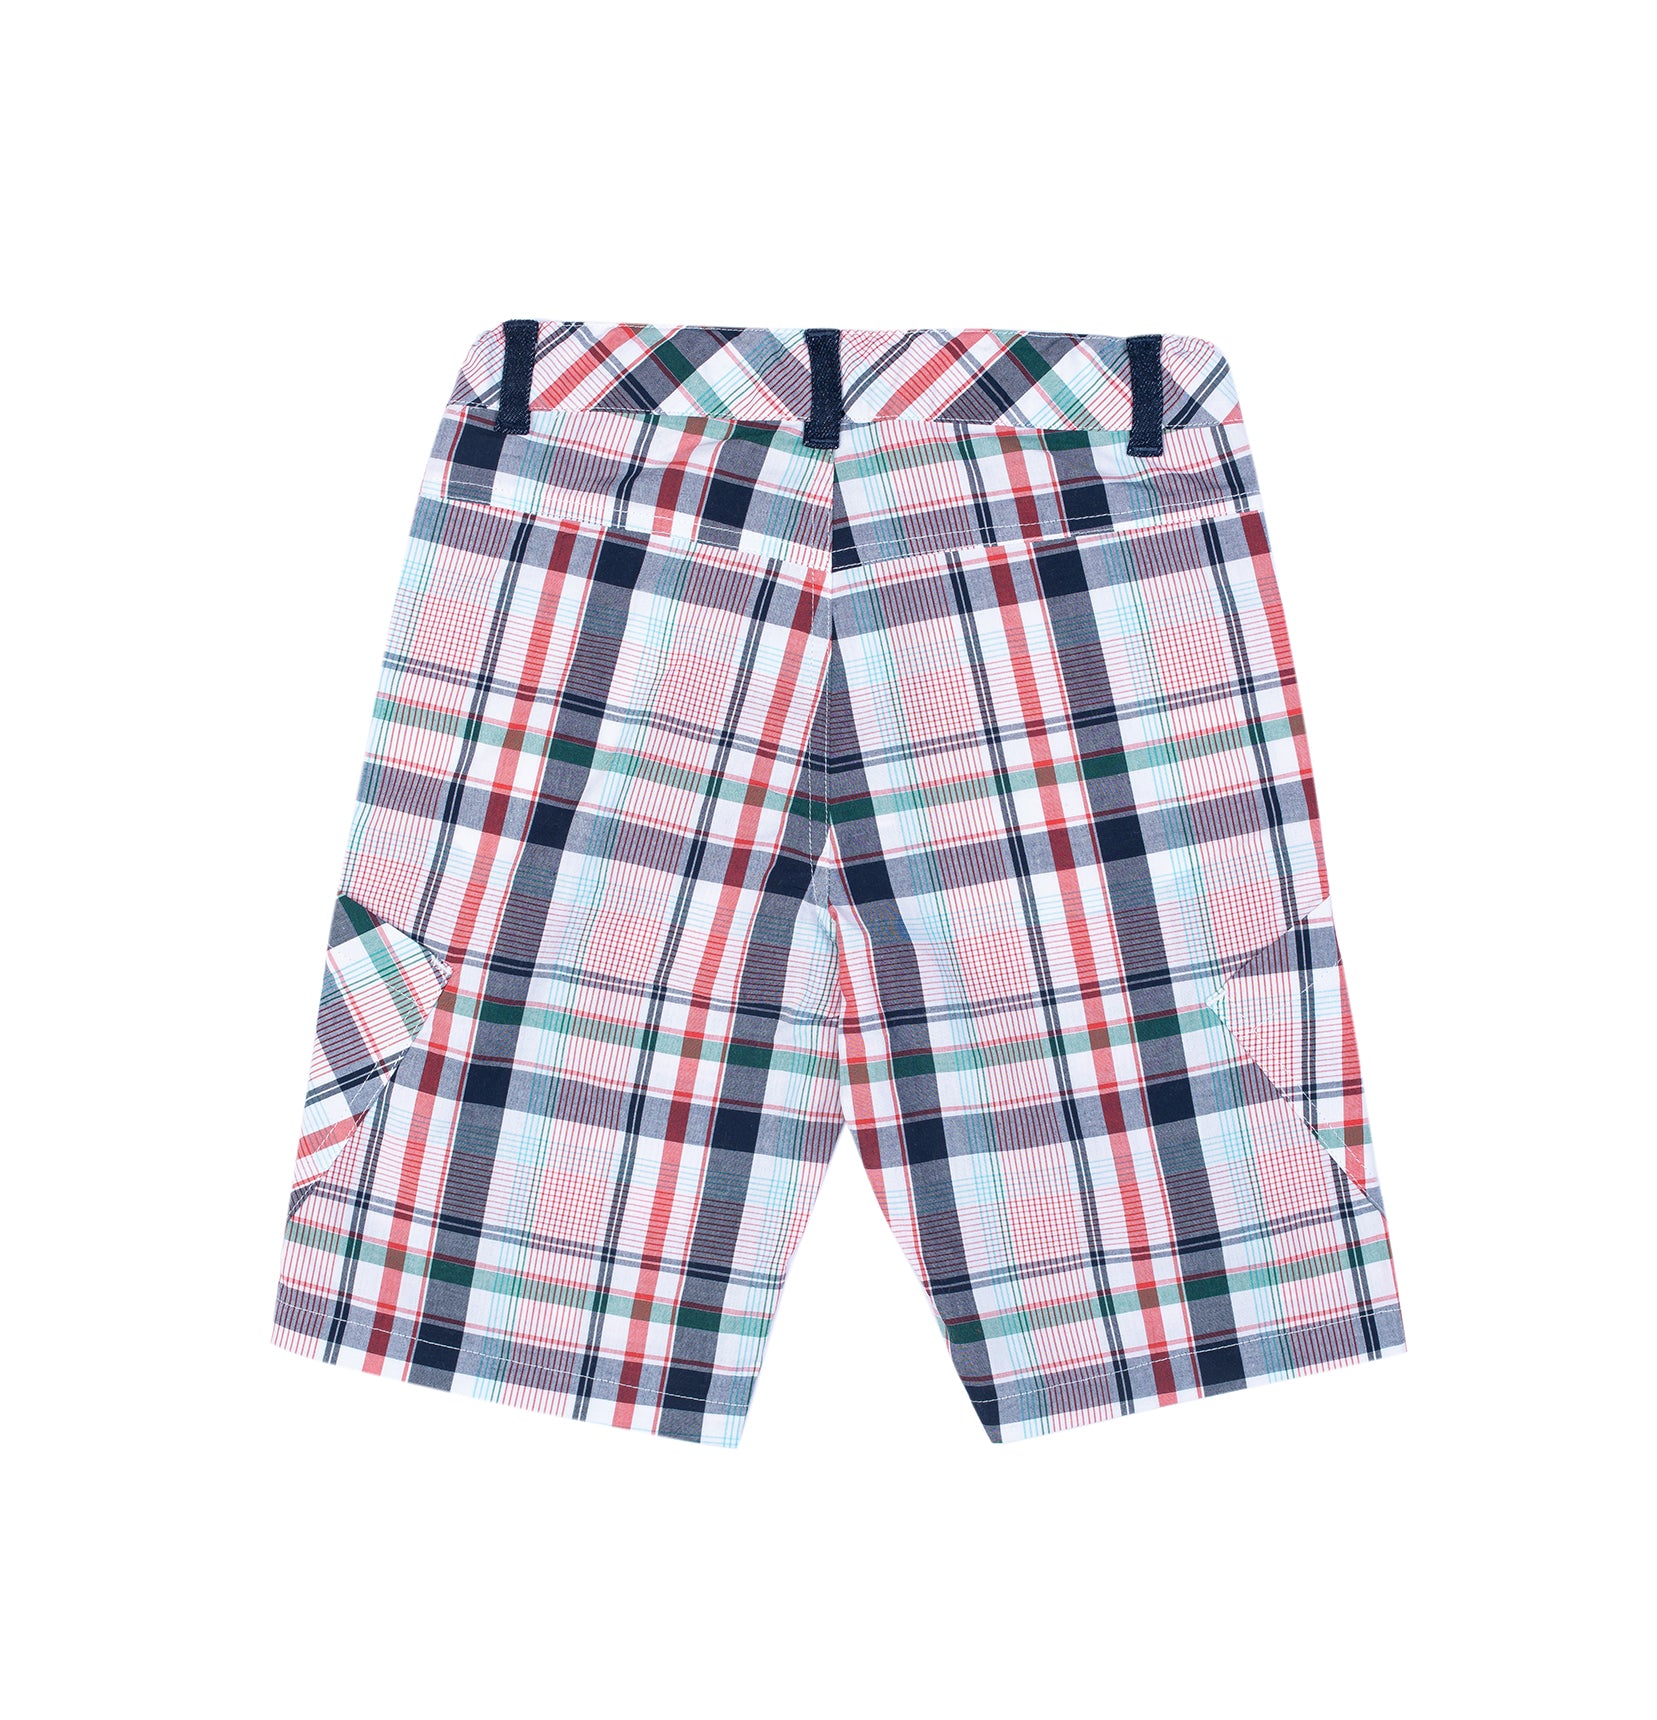 Fashionable checked short for boys by Pompelo